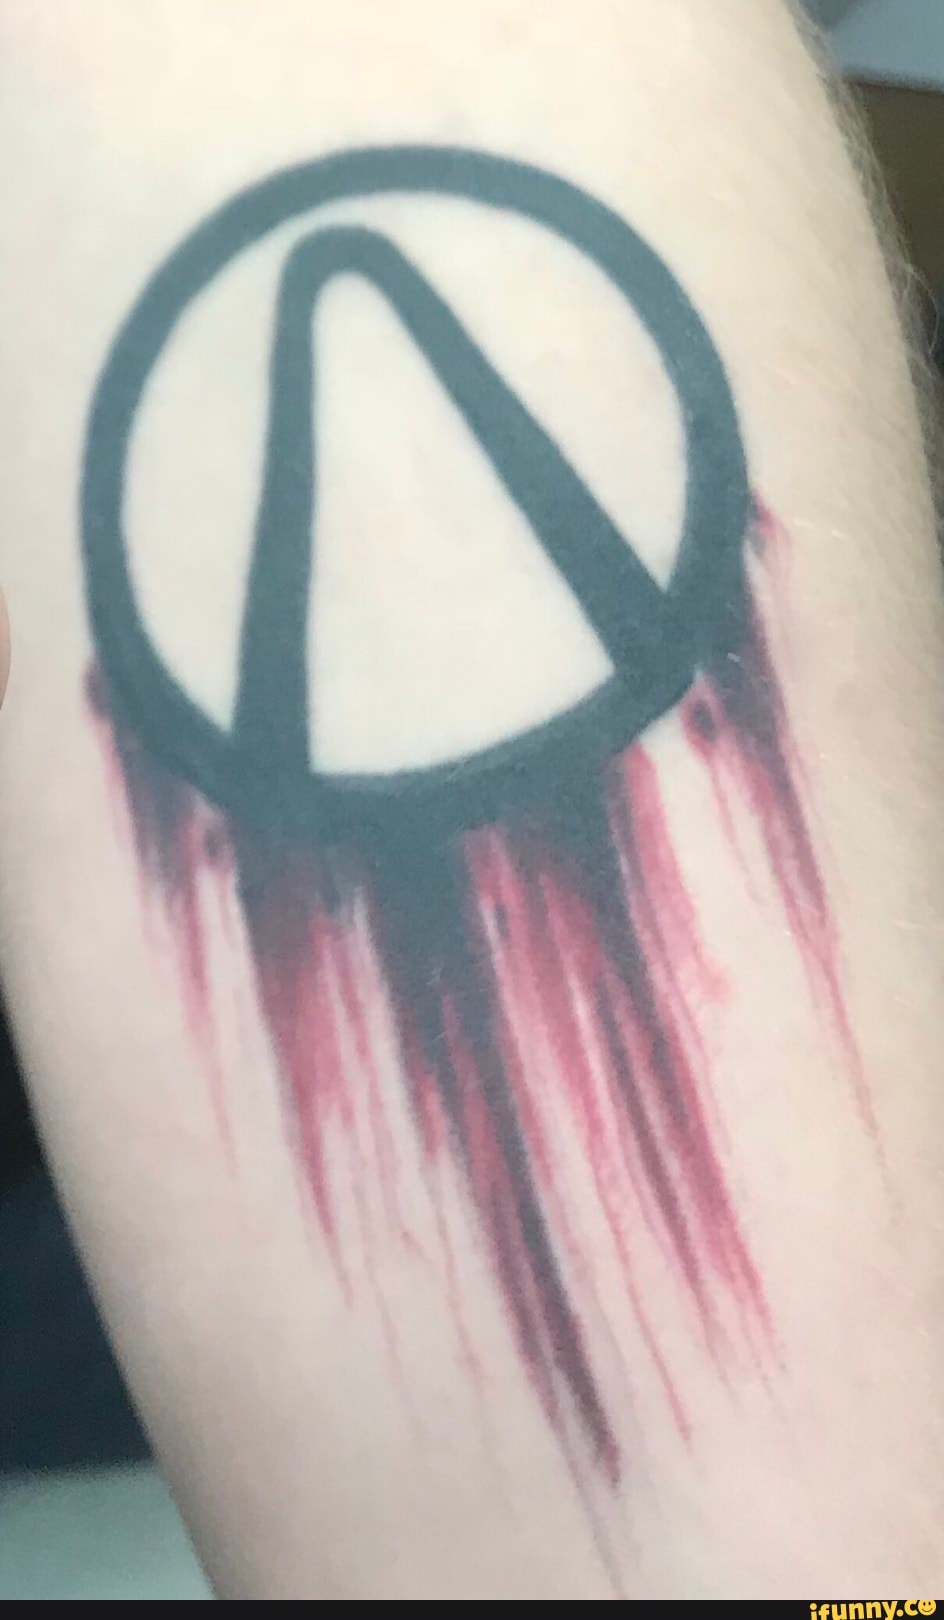 Jason Lee Music  Late post but got this banger done for my birthday  picture of it healing Borderlands vault hunter logo with a galaxy  background  borderlands tattoo borderlandstattoo borderlands3  vaulthunter 